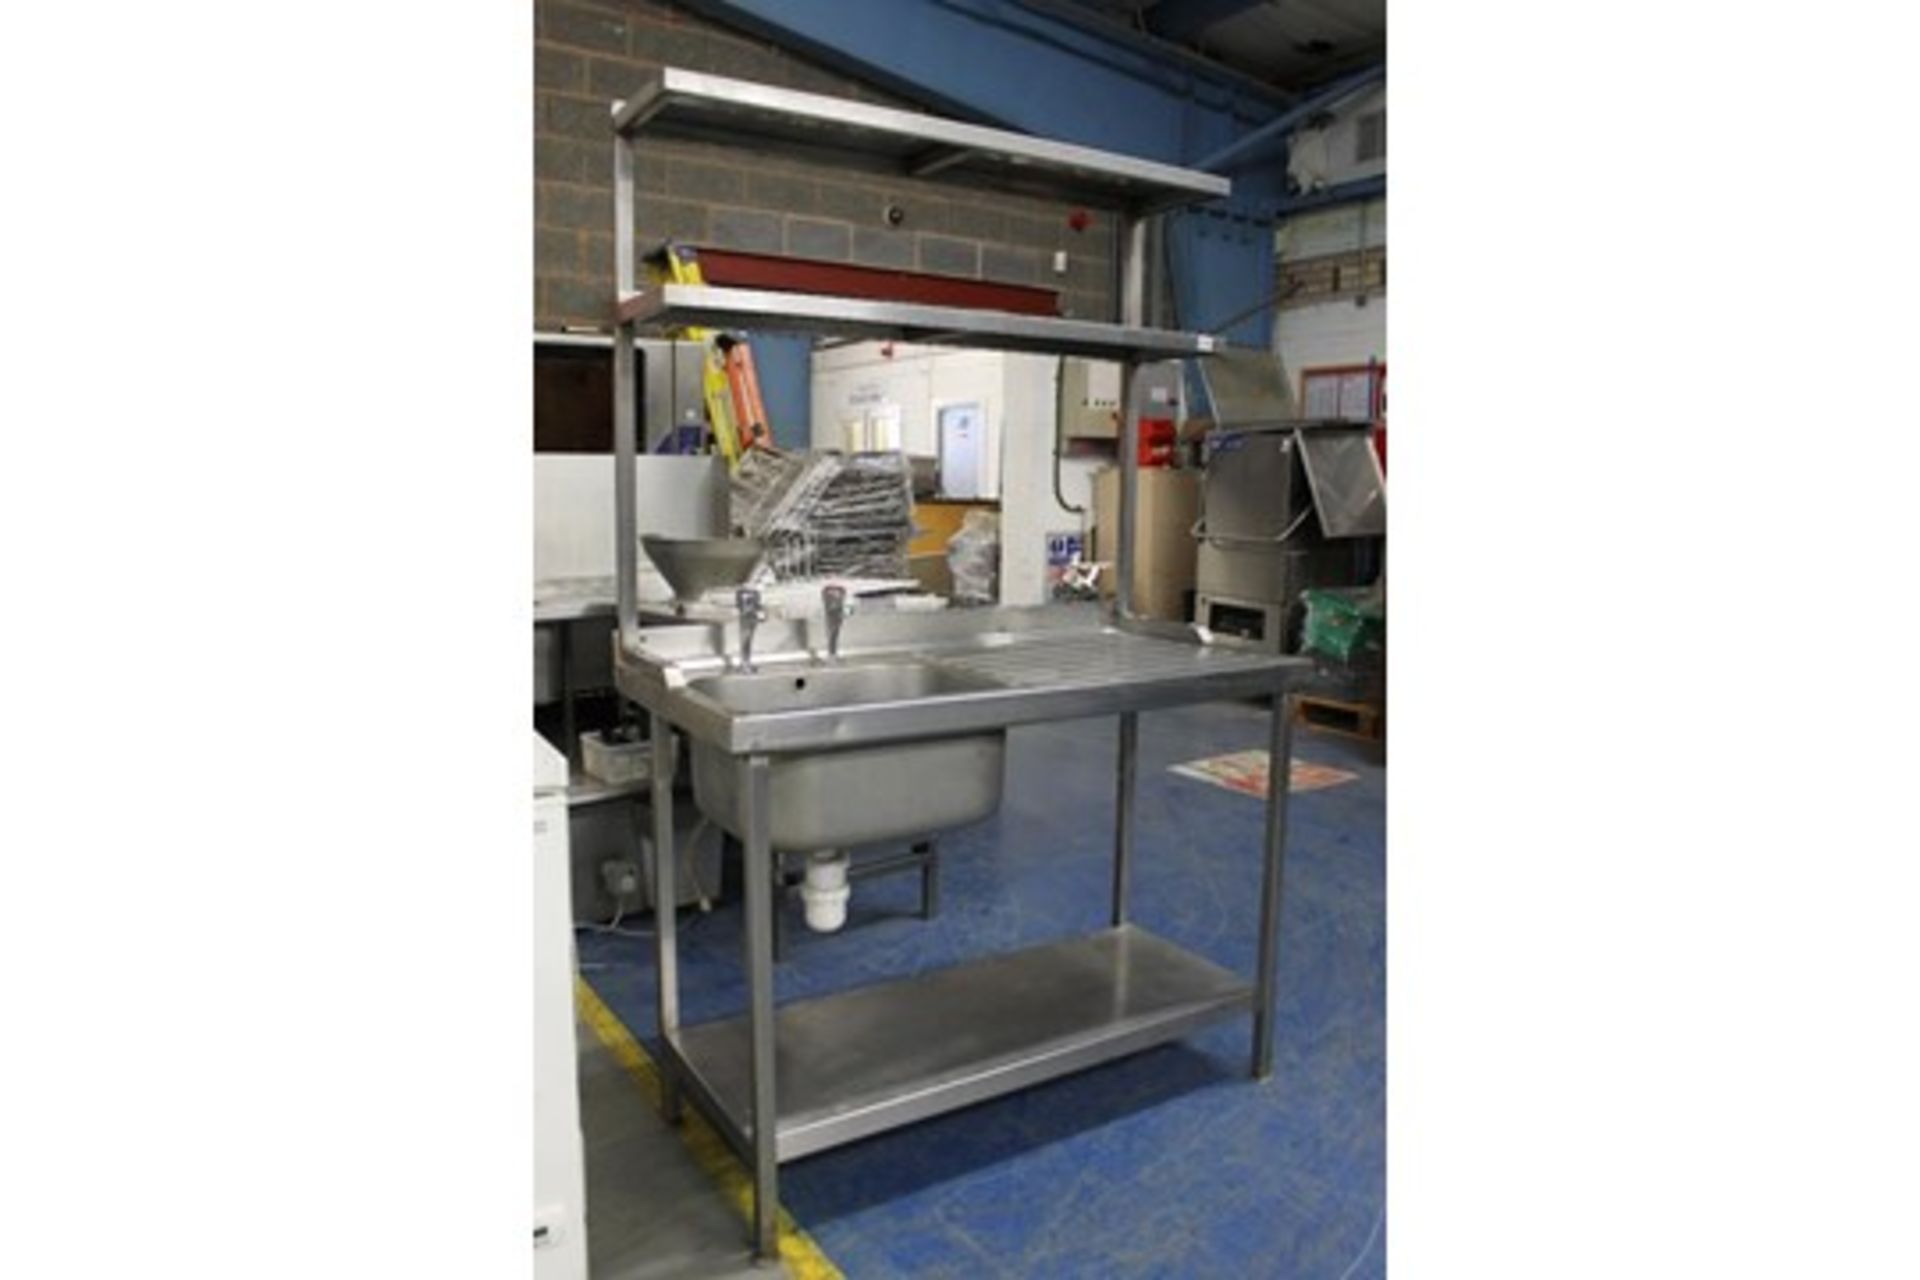 Stainless Steel Single Bowl Catering Sink with Under Shelf + 2 Upper Shelf Units – W120cm x H186cm x - Image 2 of 3